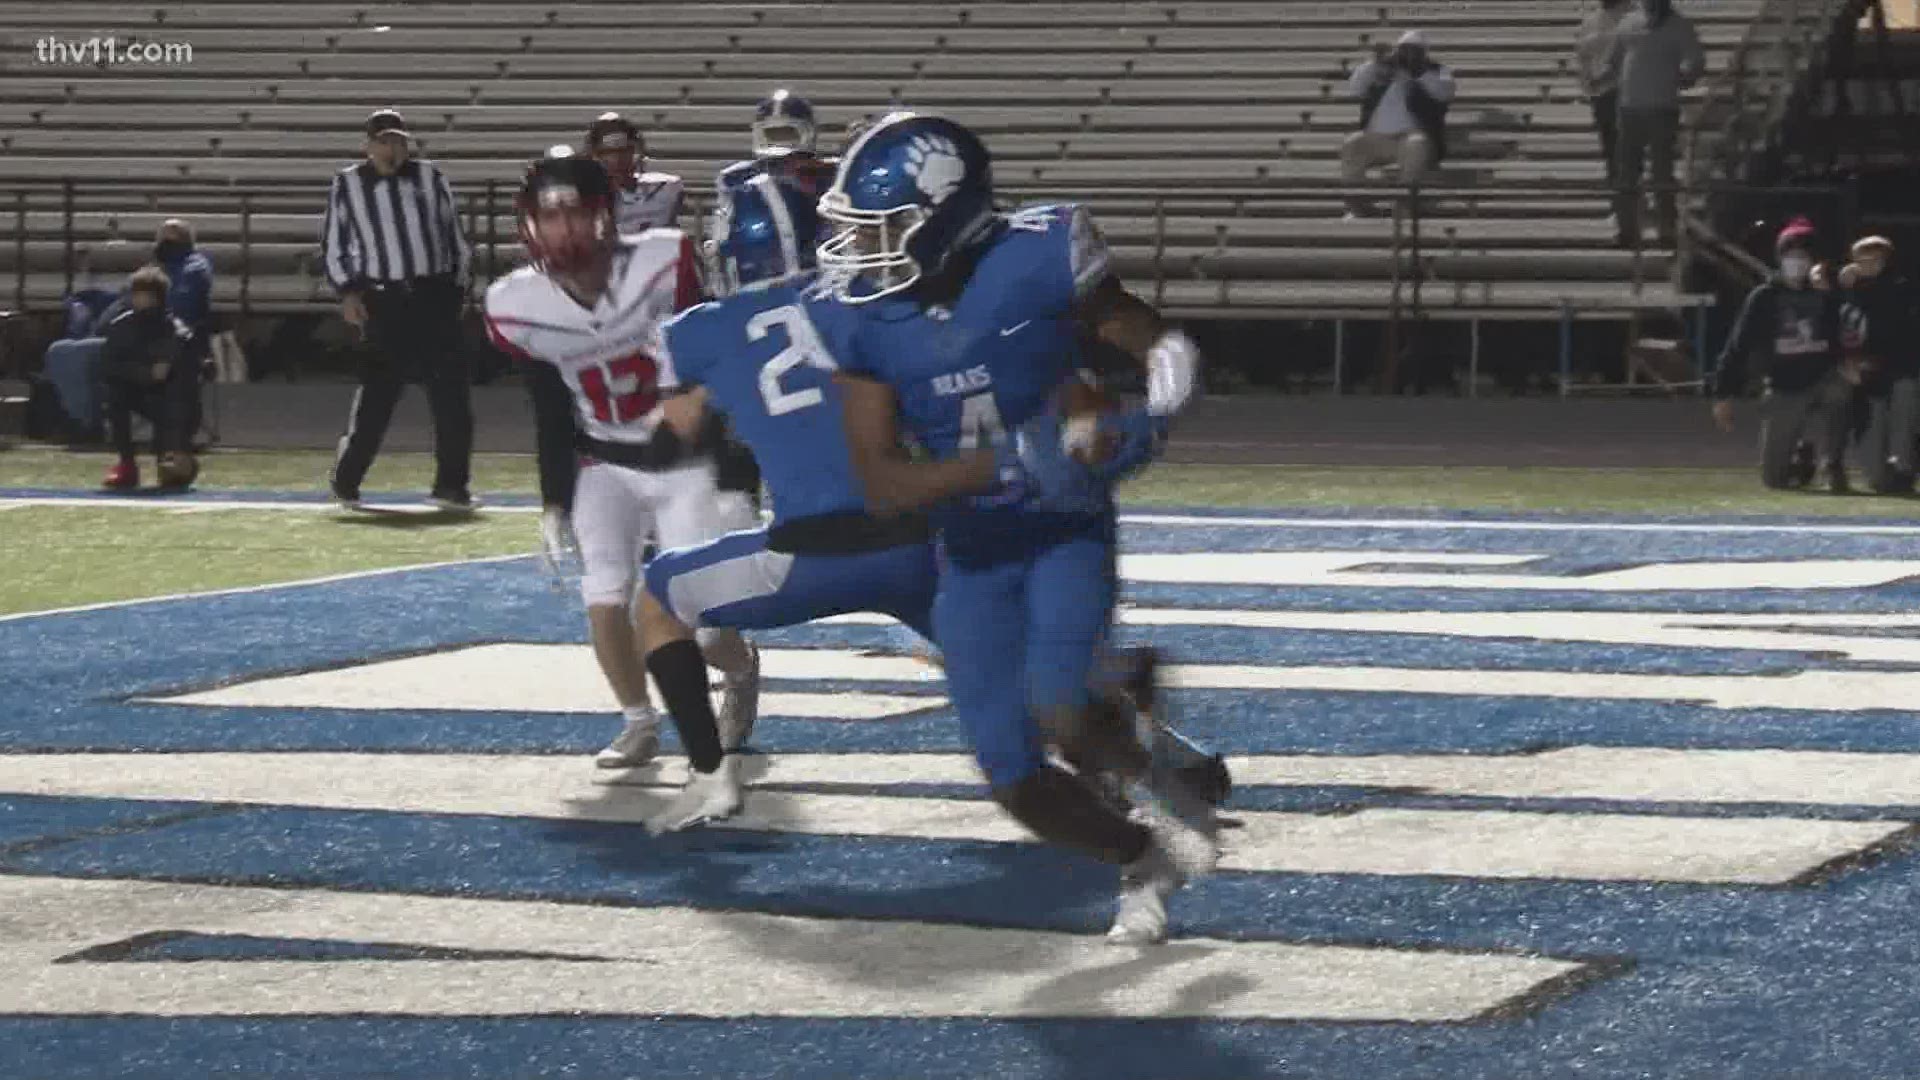 Sylvan Hills cruises at home over Russellville, 54-19